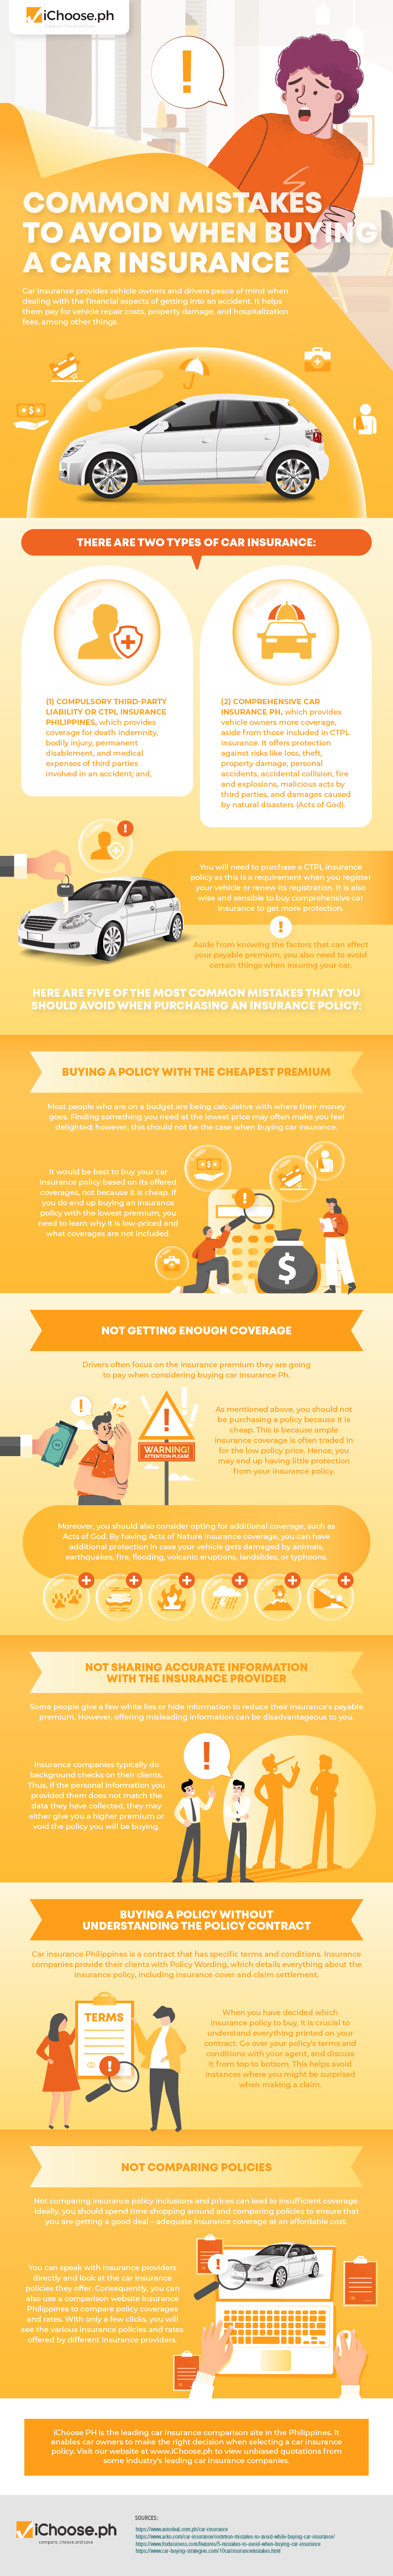 Common-Mistakes-to-Avoid-When-Buying-a-Car-Insurance-Infographic